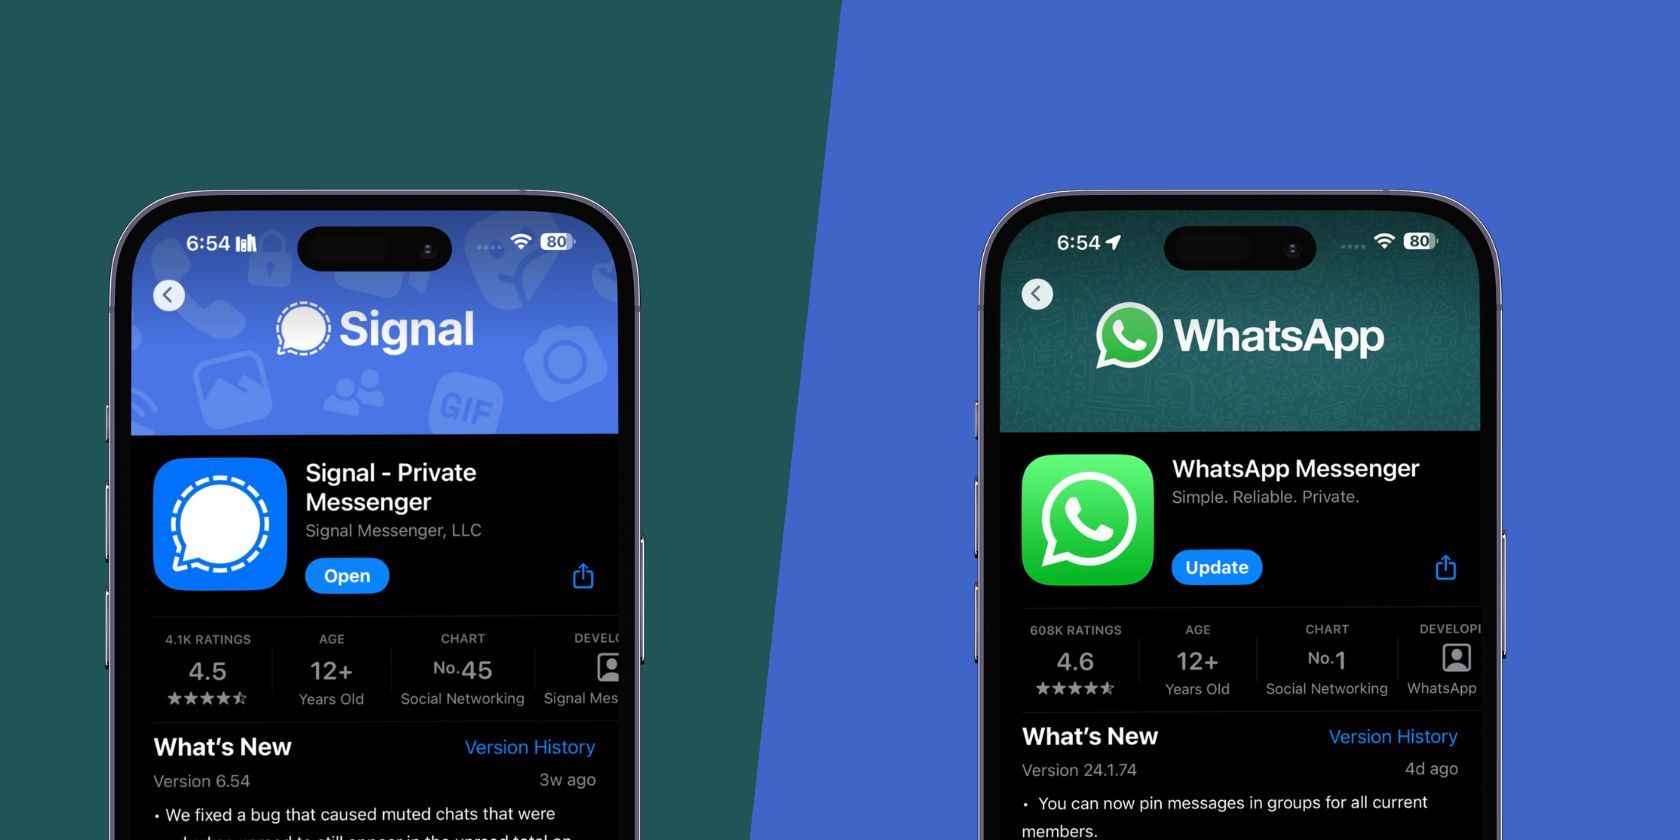 WhatsApp and Signal download page side by side